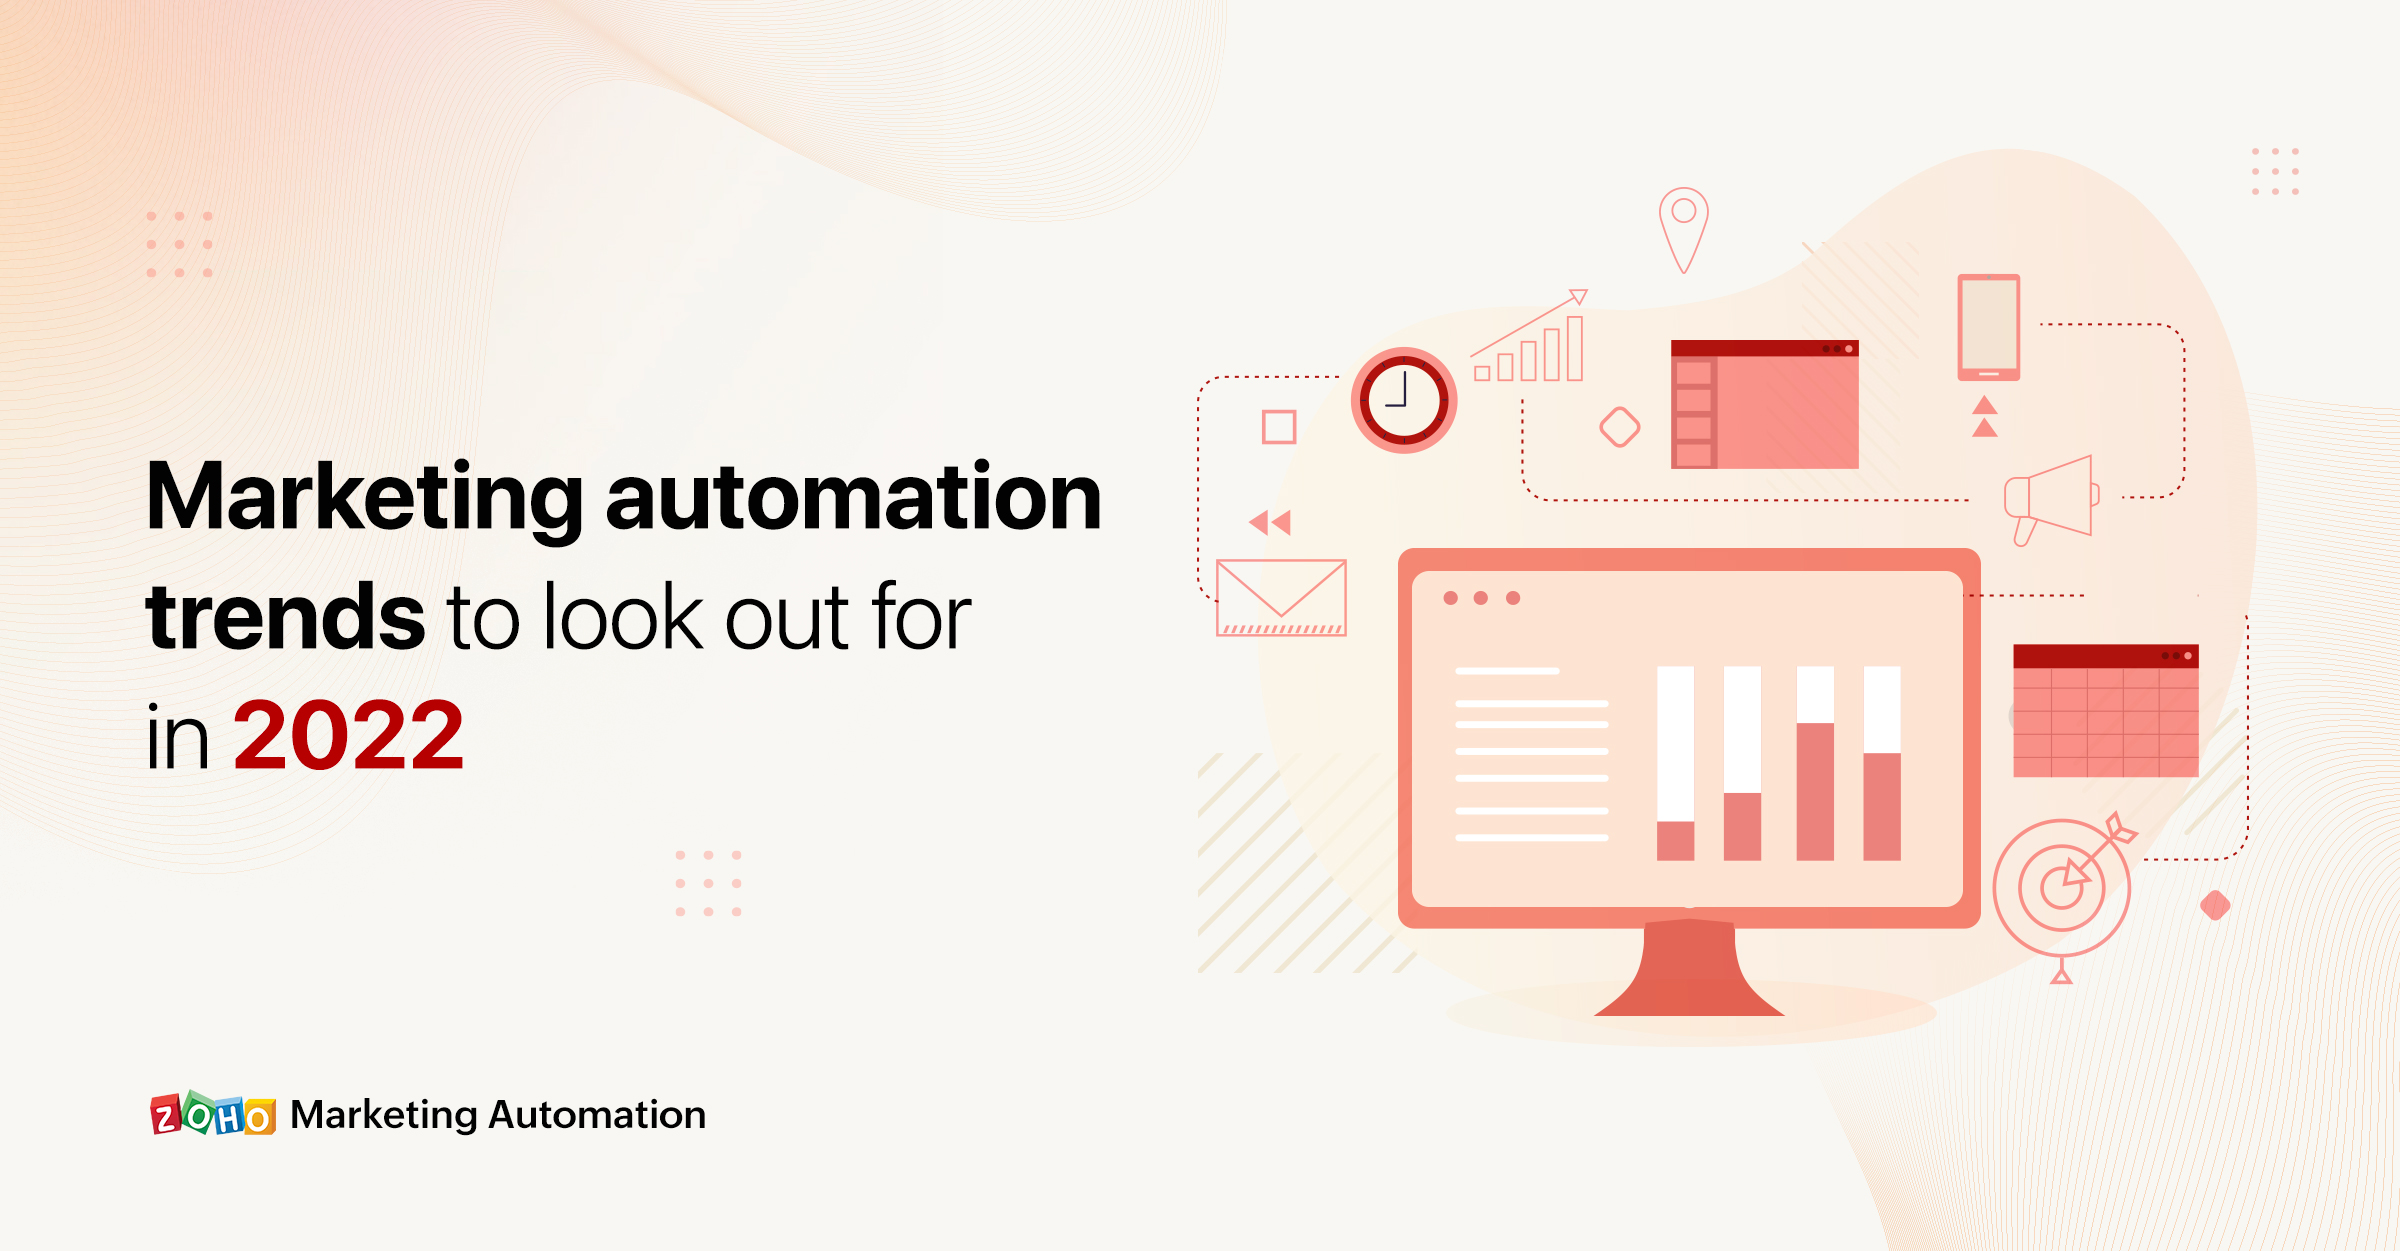 6 important trends in marketing automation for 2022